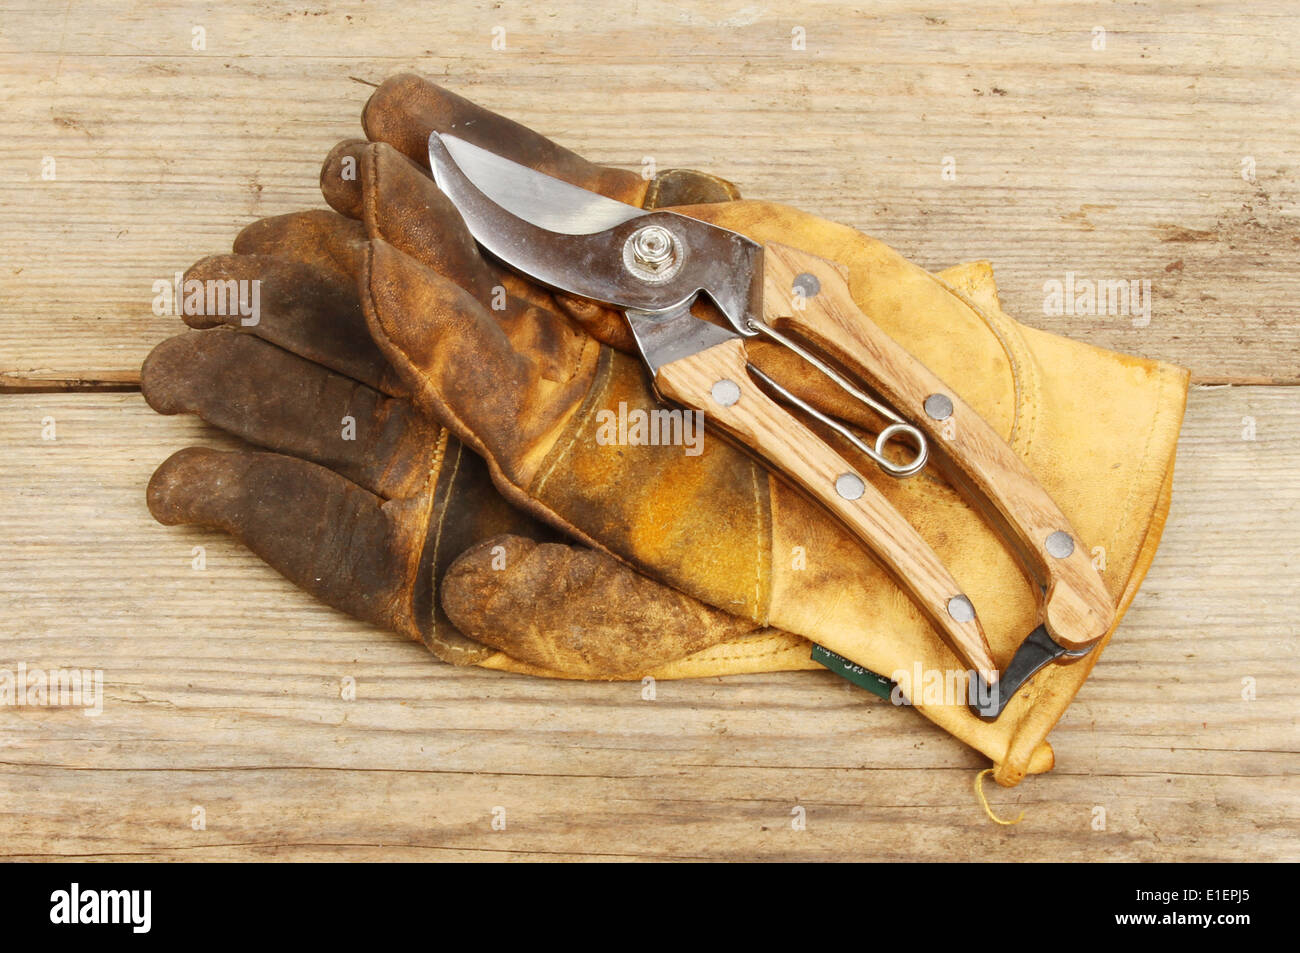 Secateurs and leather gardening gloves on a wooden board Stock Photo